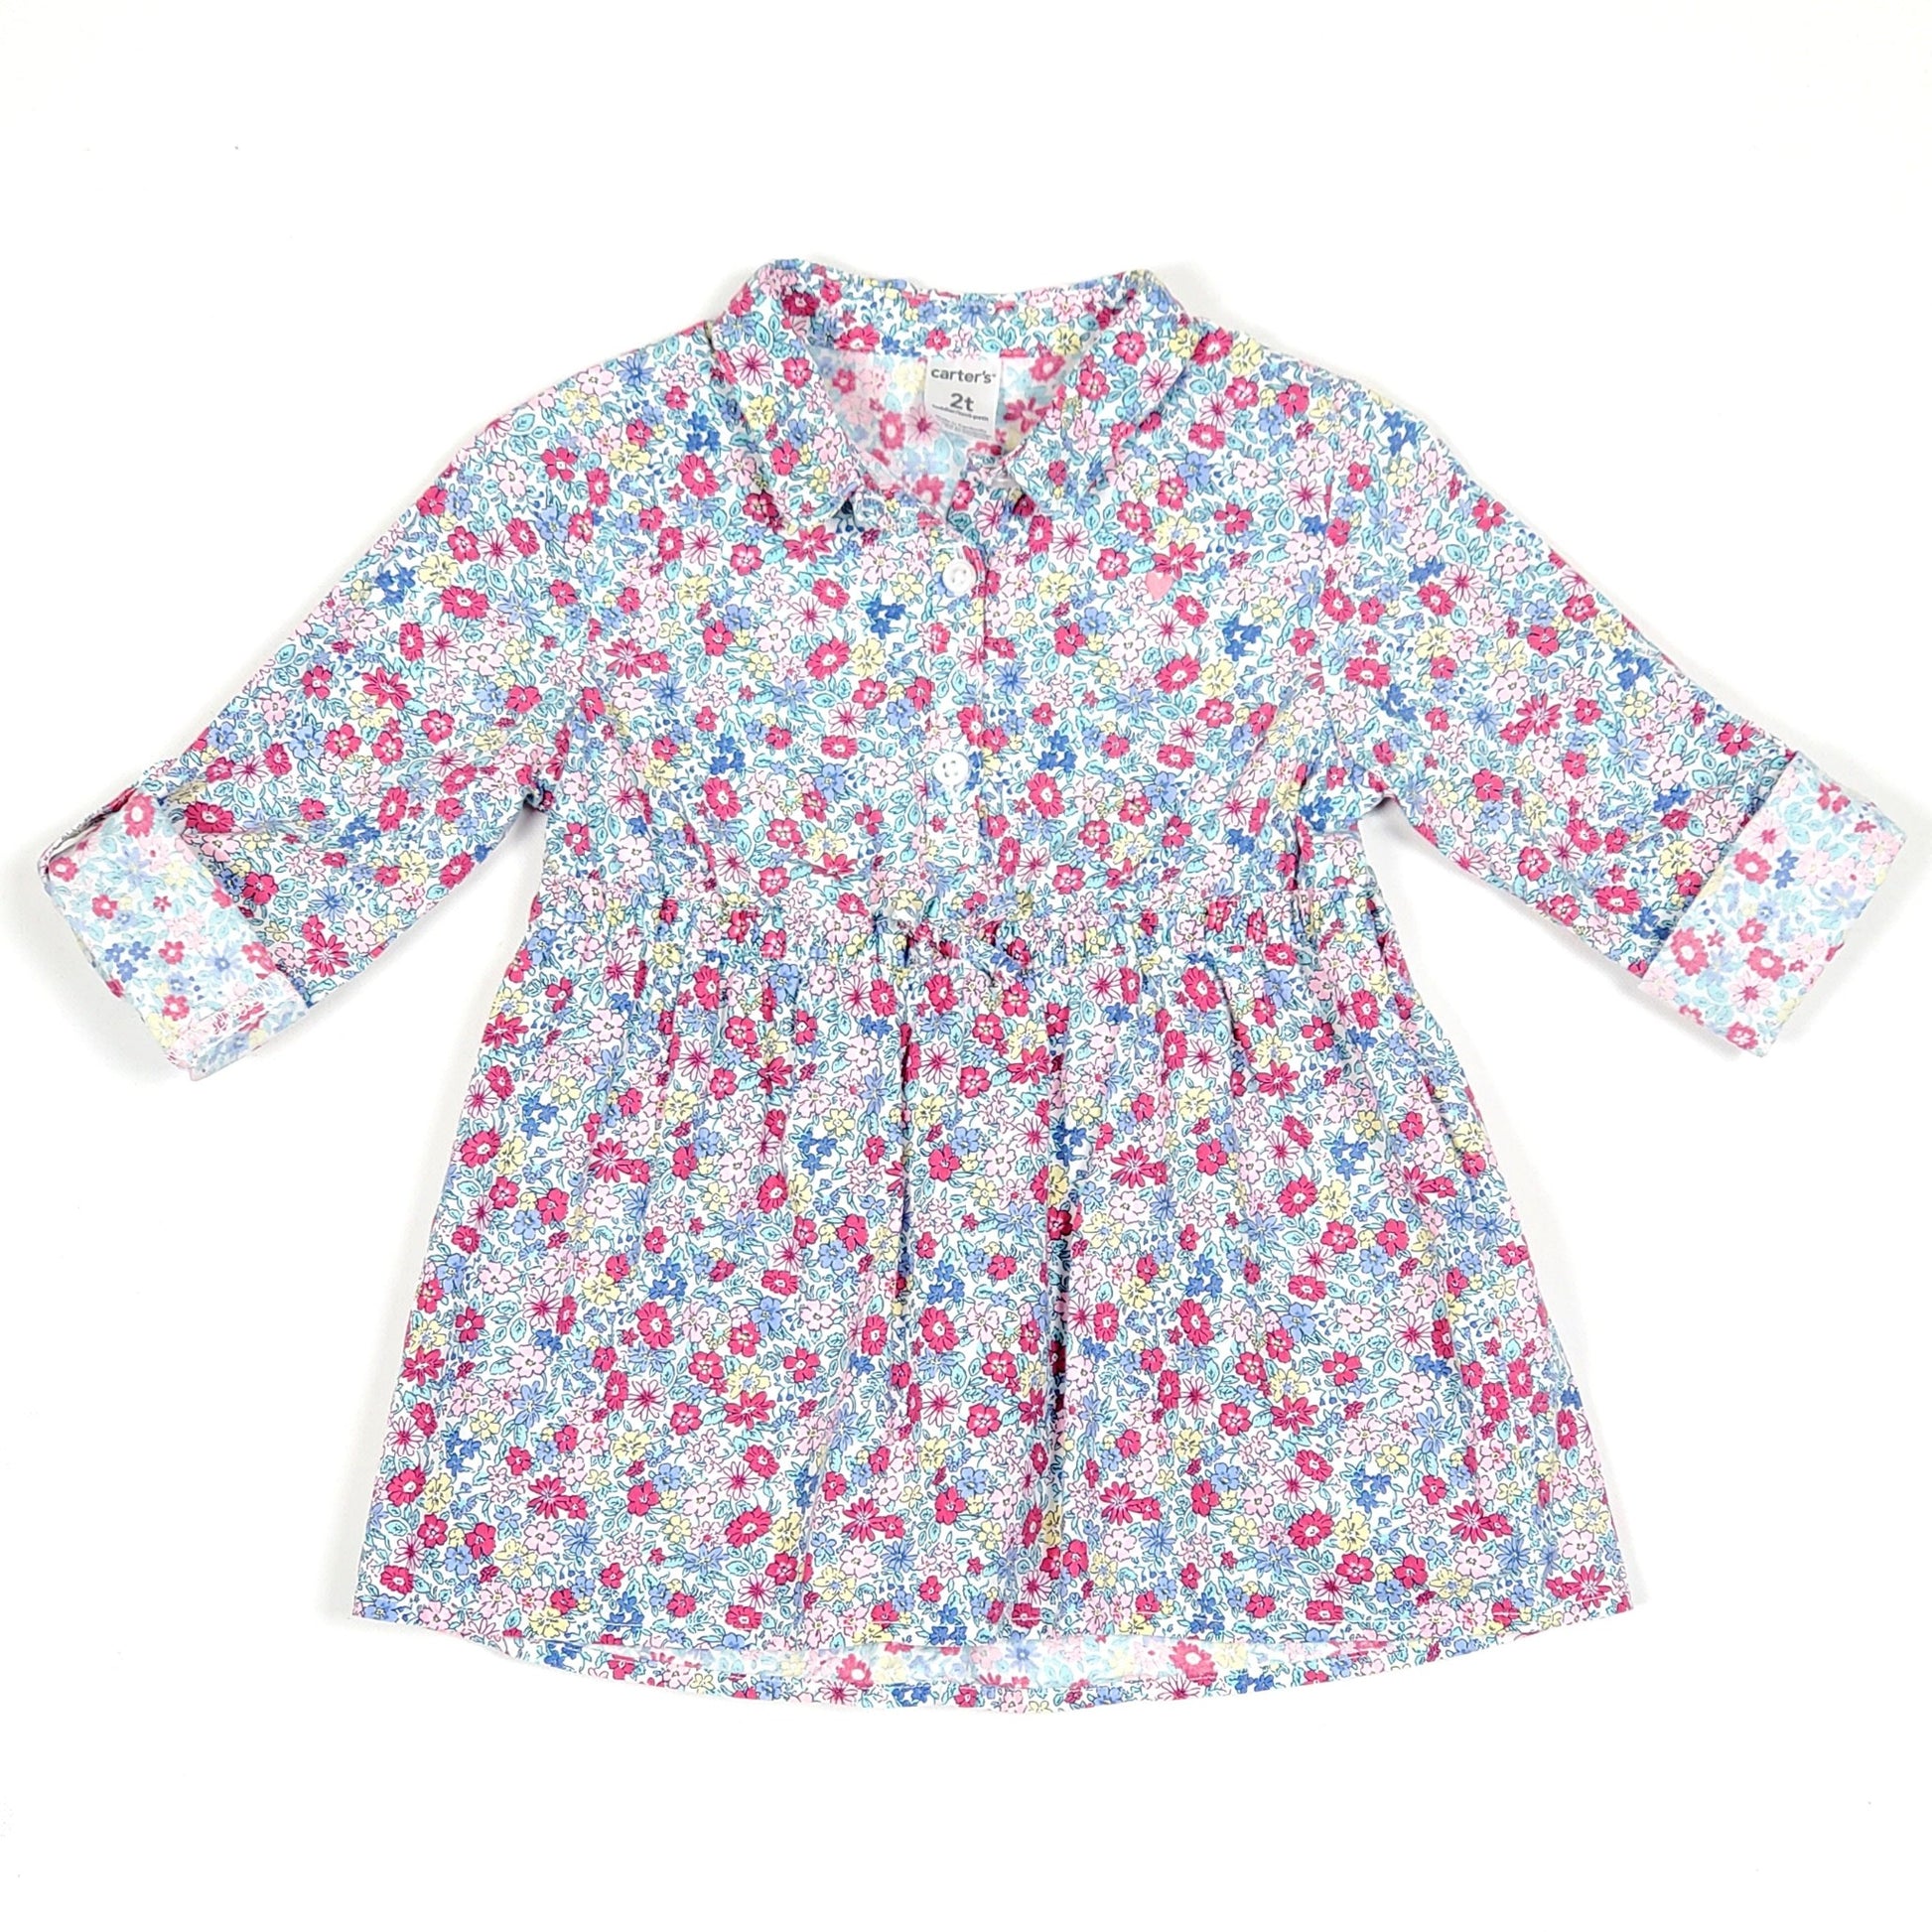 Carters Floral Tunic Girls top 2T Used View 1